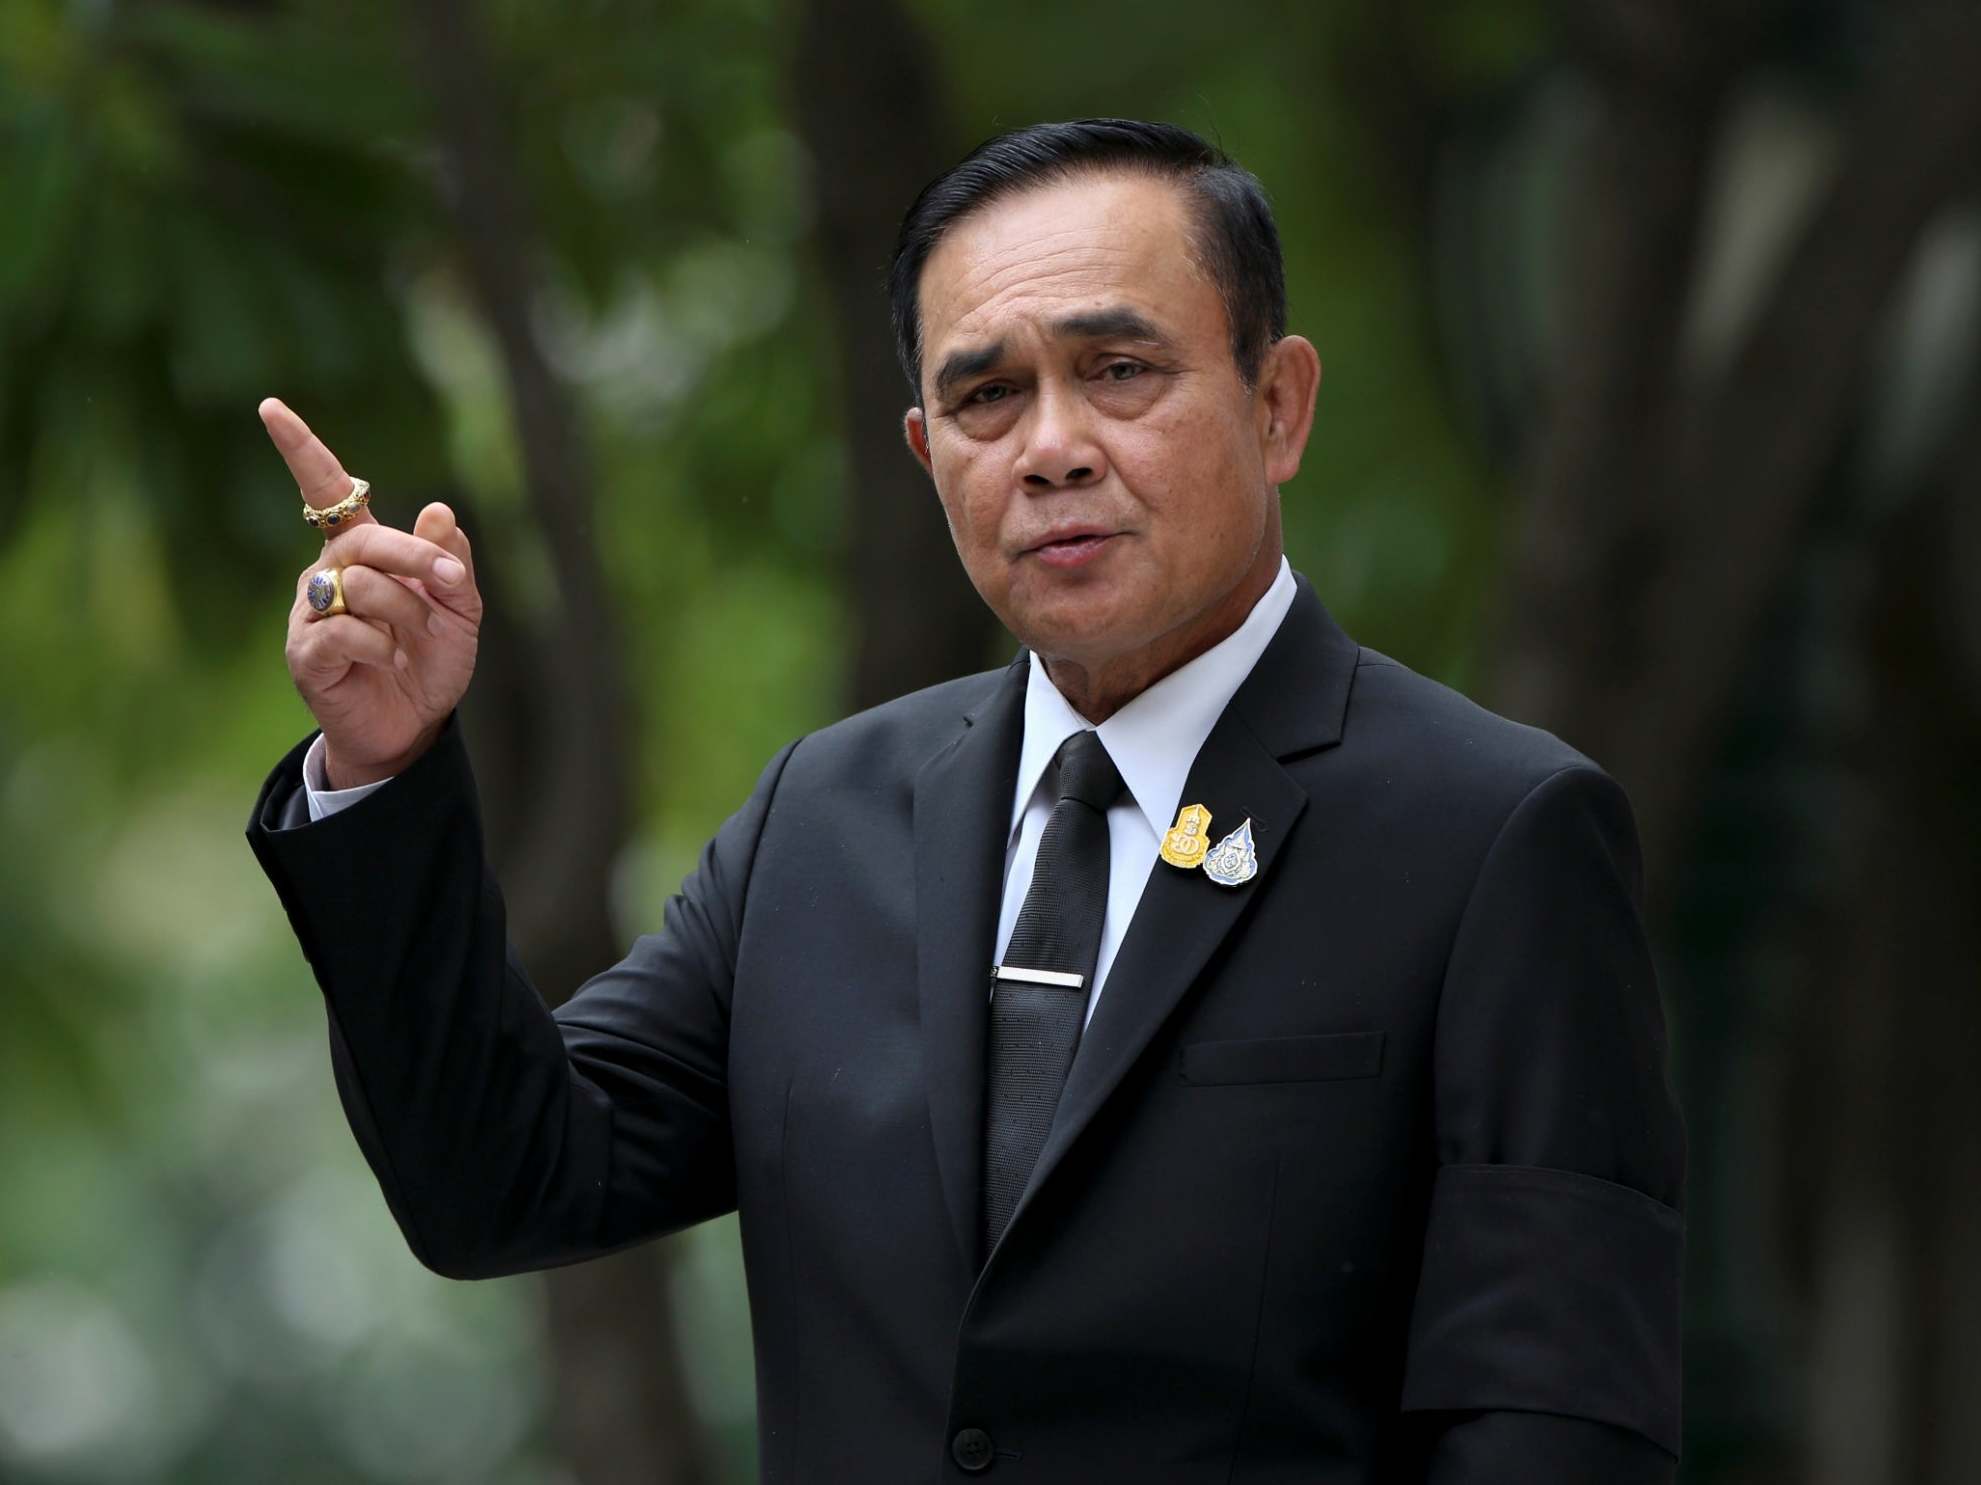 Prayuth Chan-ocha scrapped Thailand's constitution and restricted civil liberties as the head of the junta in 2014